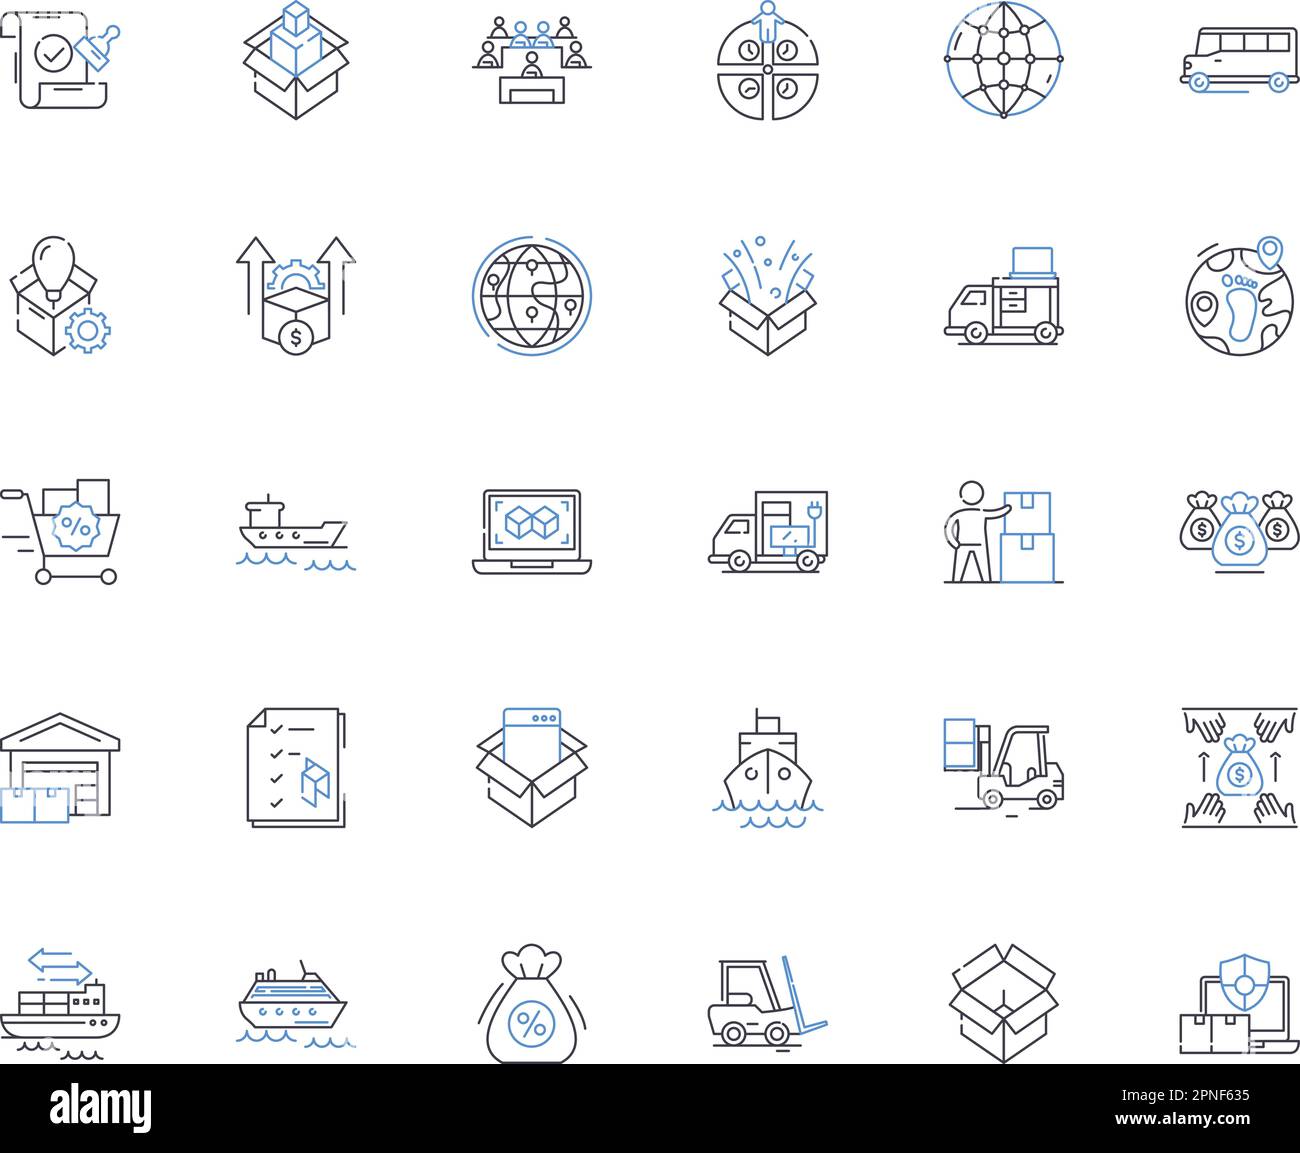 Mail carriers line icons collection. Deliveries, Postal, Packages, Letters, Couriers, Mailman, Routes vector and linear illustration. Parcels,Postmark Stock Vector